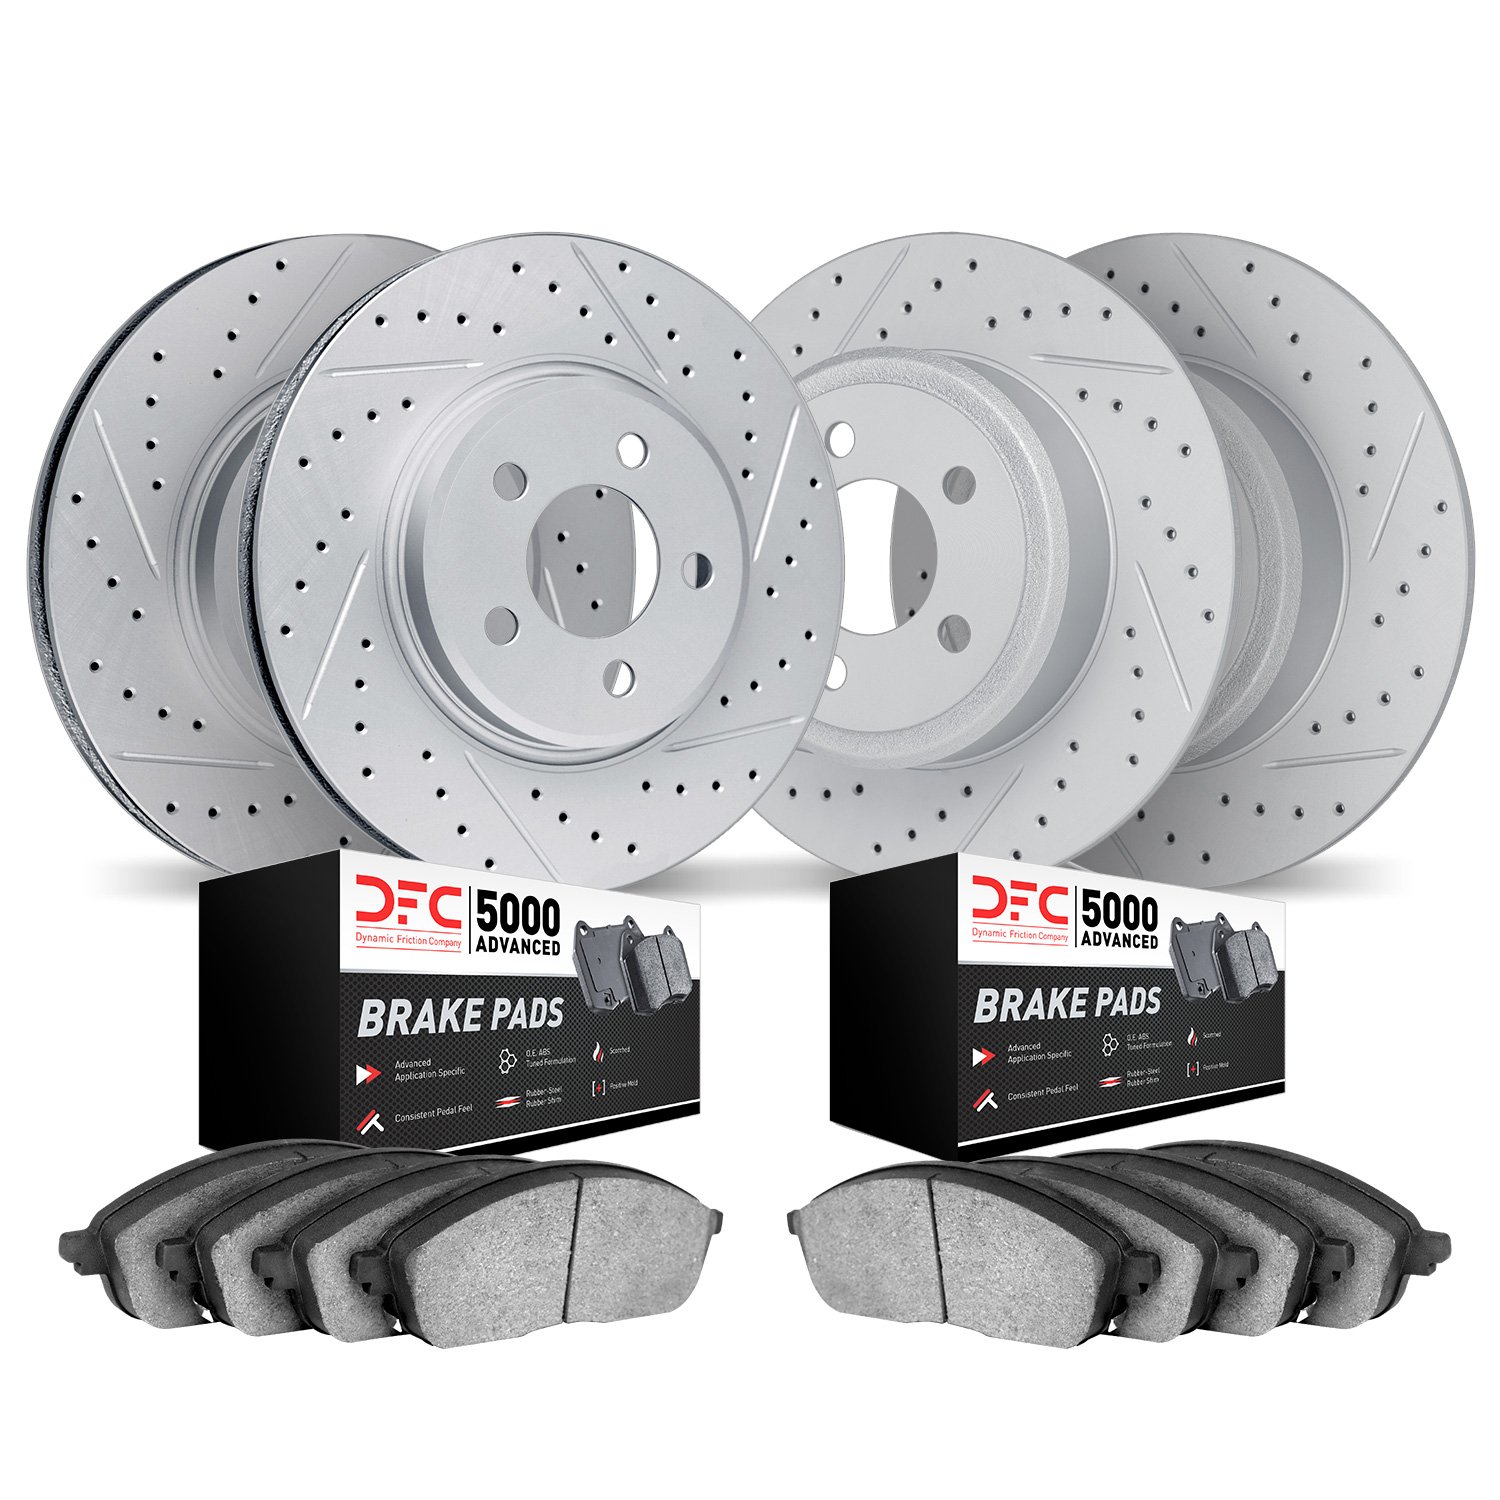 2504-59043 Geoperformance Drilled/Slotted Rotors w/5000 Advanced Brake Pads Kit, 2015-2017 Acura/Honda, Position: Front and Rear